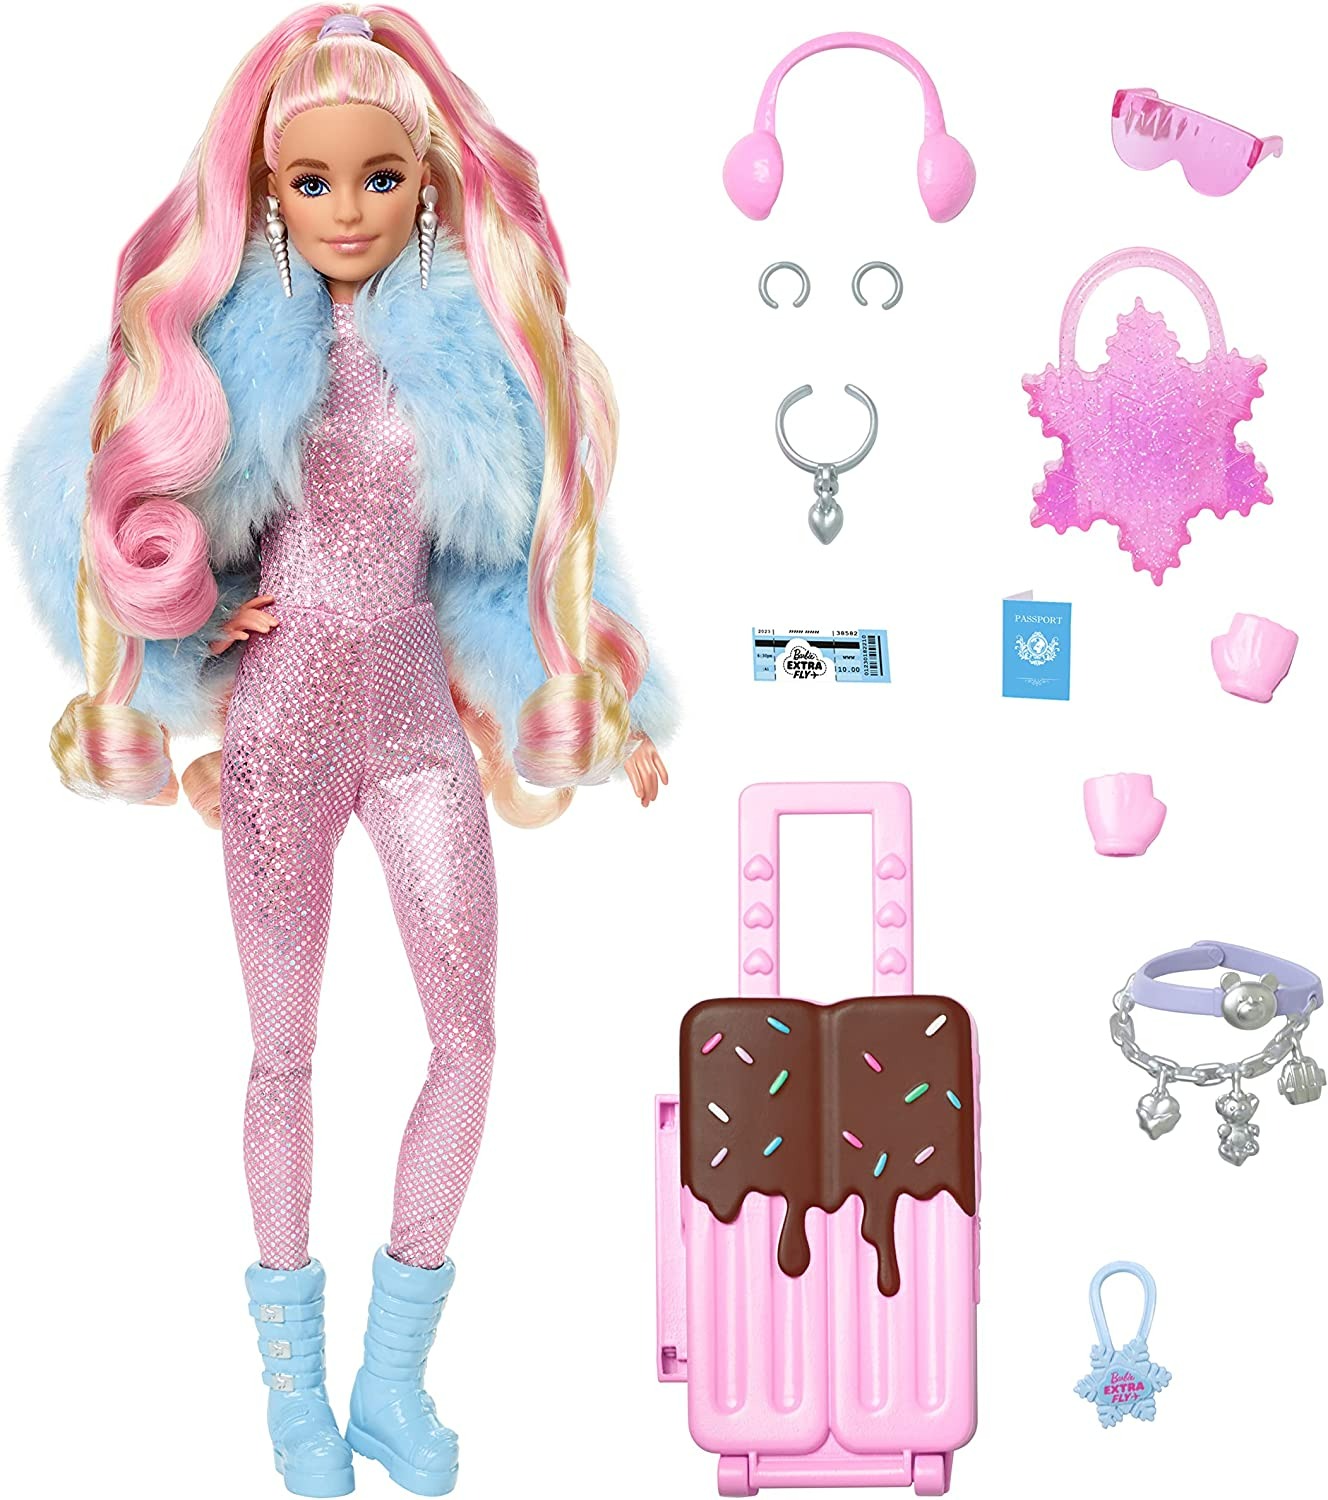 Travel Barbie Doll with Wintery Snow Fashion-0